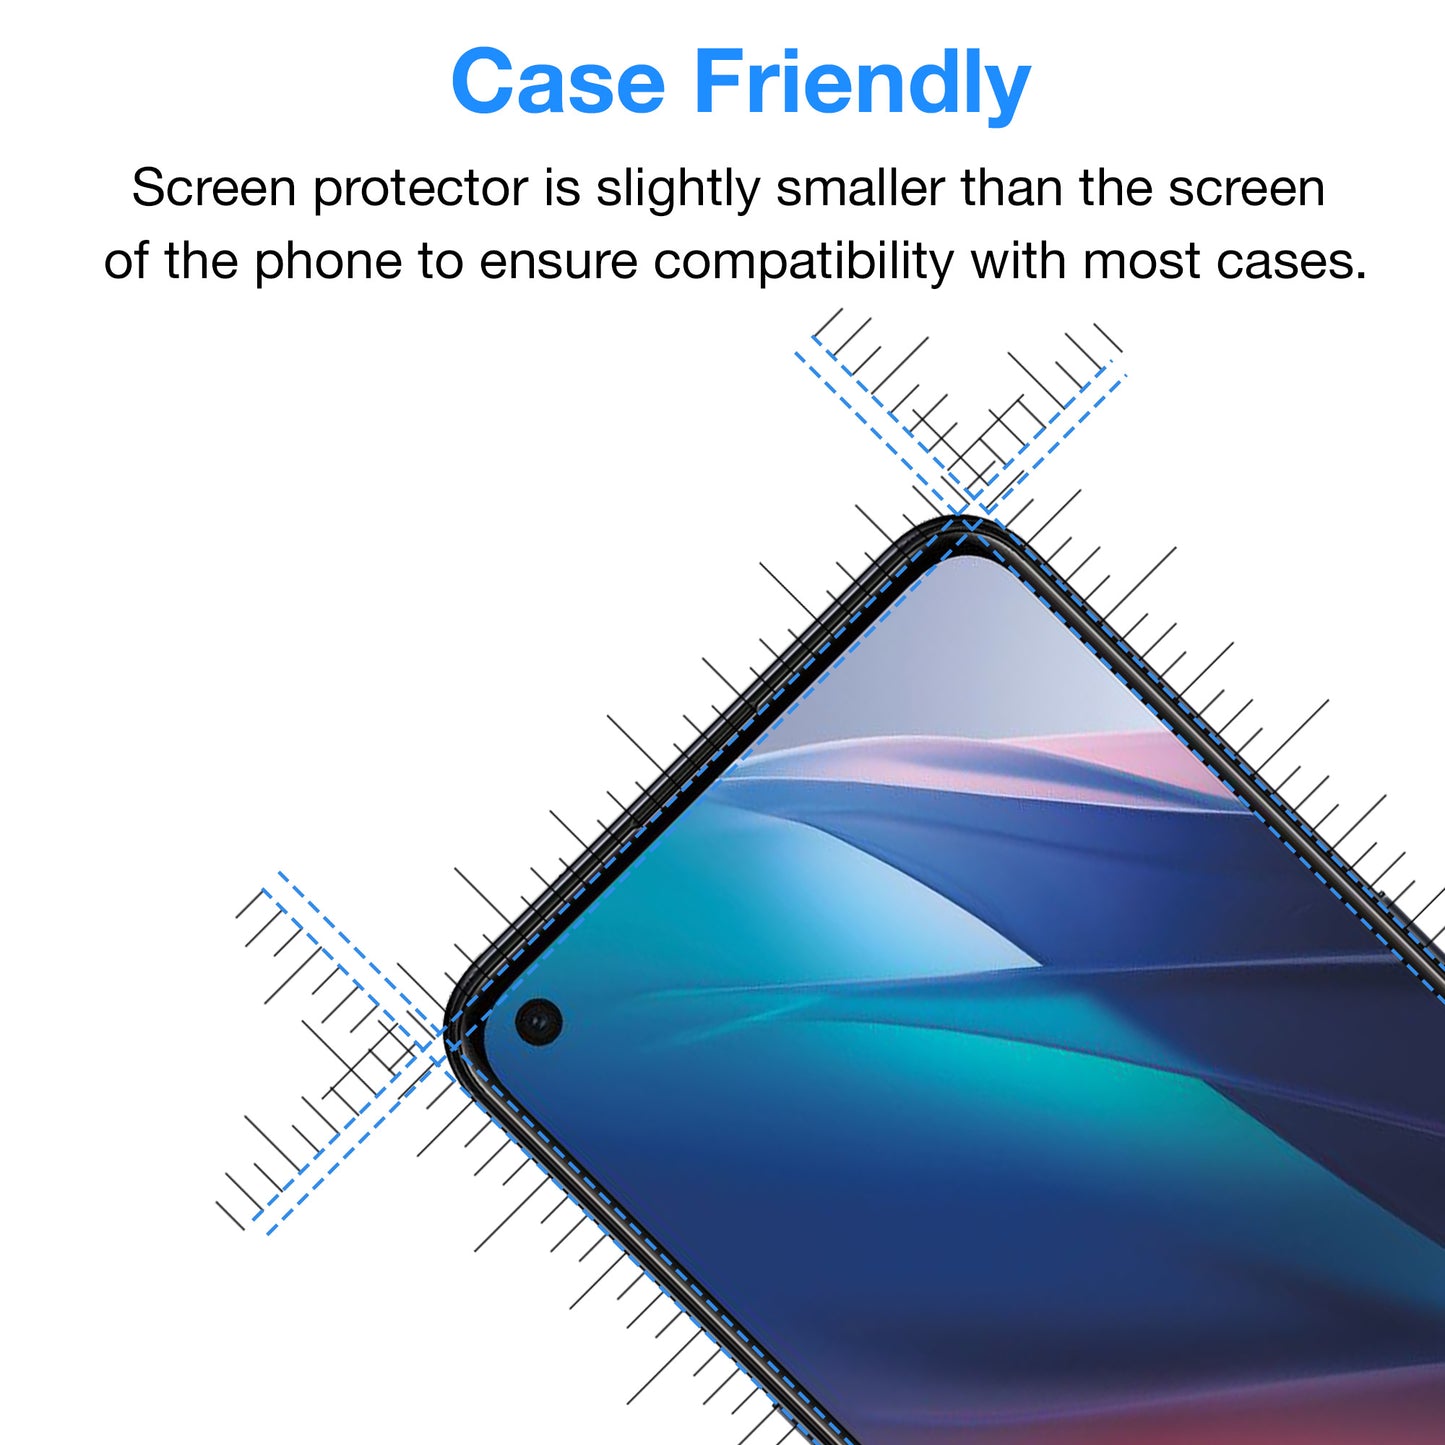 [3 Pack] MEZON OPPO Find X5 Lite Ultra Clear Screen Protector Case Friendly Film (OPPO Find X5 Lite, Clear)